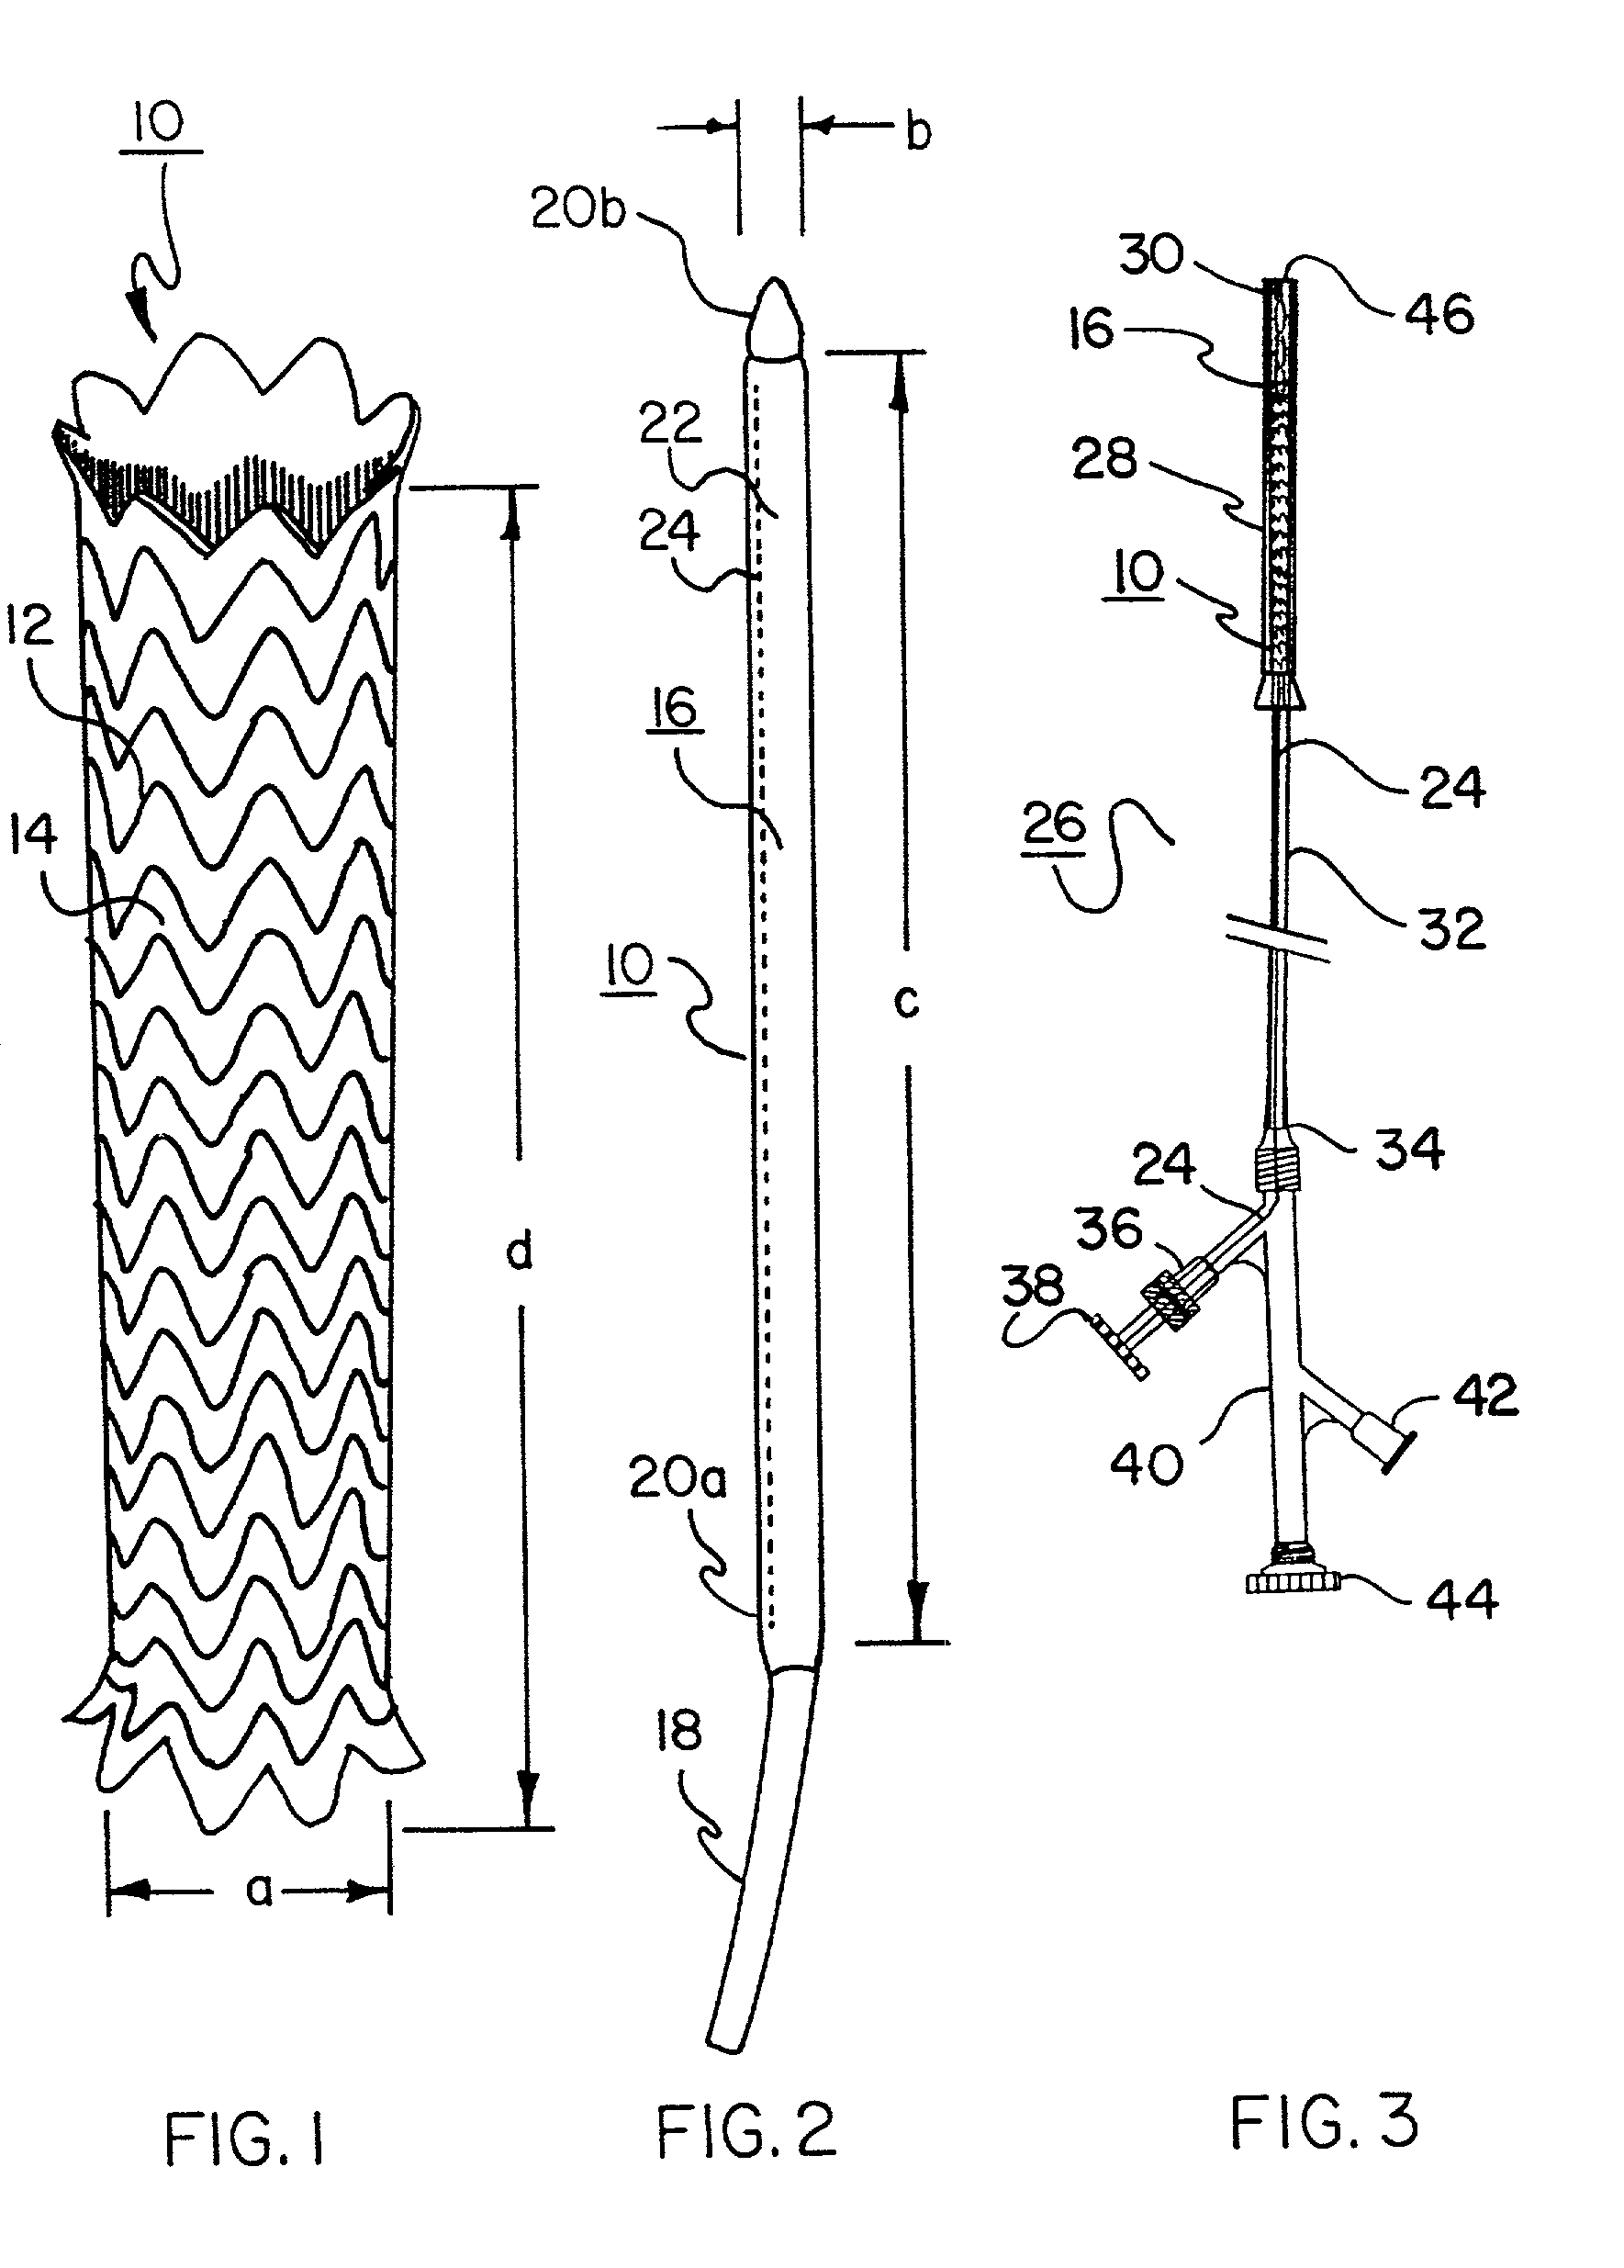 Method of producing low profile stent and graft combination